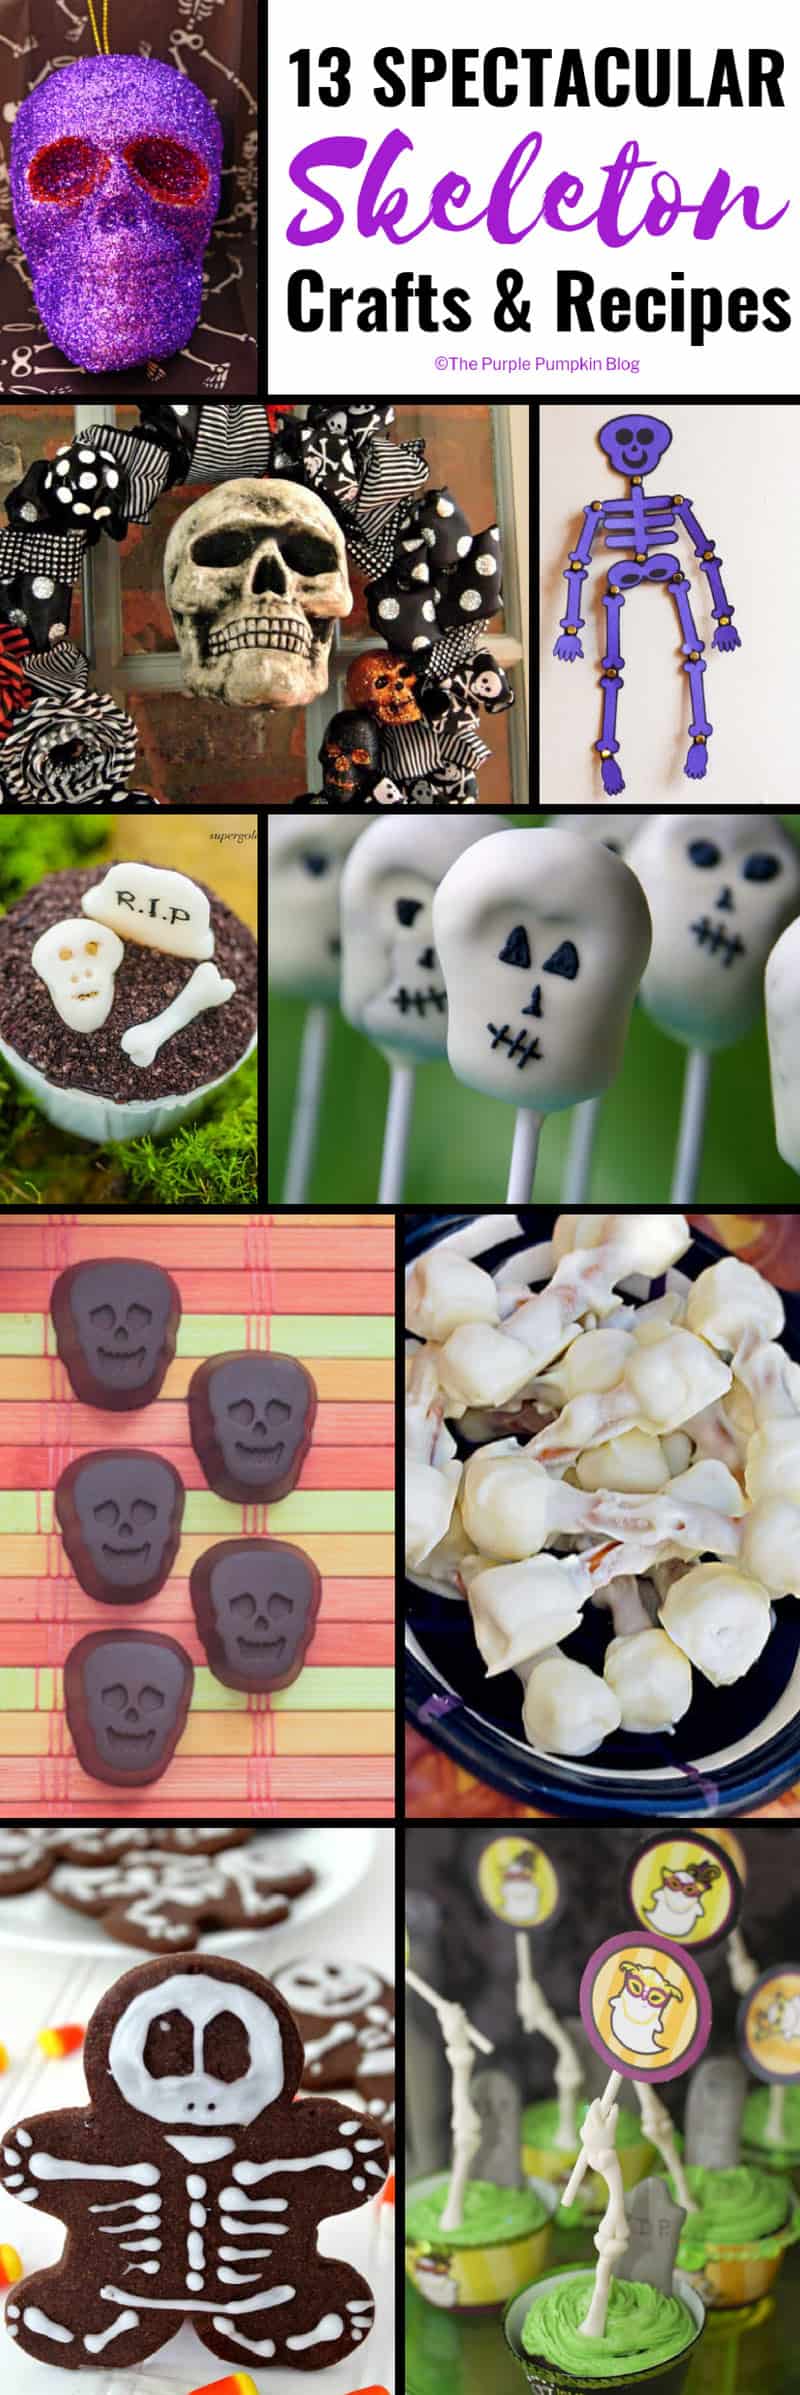 13 Spectacular Skeleton Crafts & Recipes for Halloween - a selection of spooky crafts including wreaths, paper crafts, and more, plus delicious recipes for cake pops, truffles, and cupcakes!